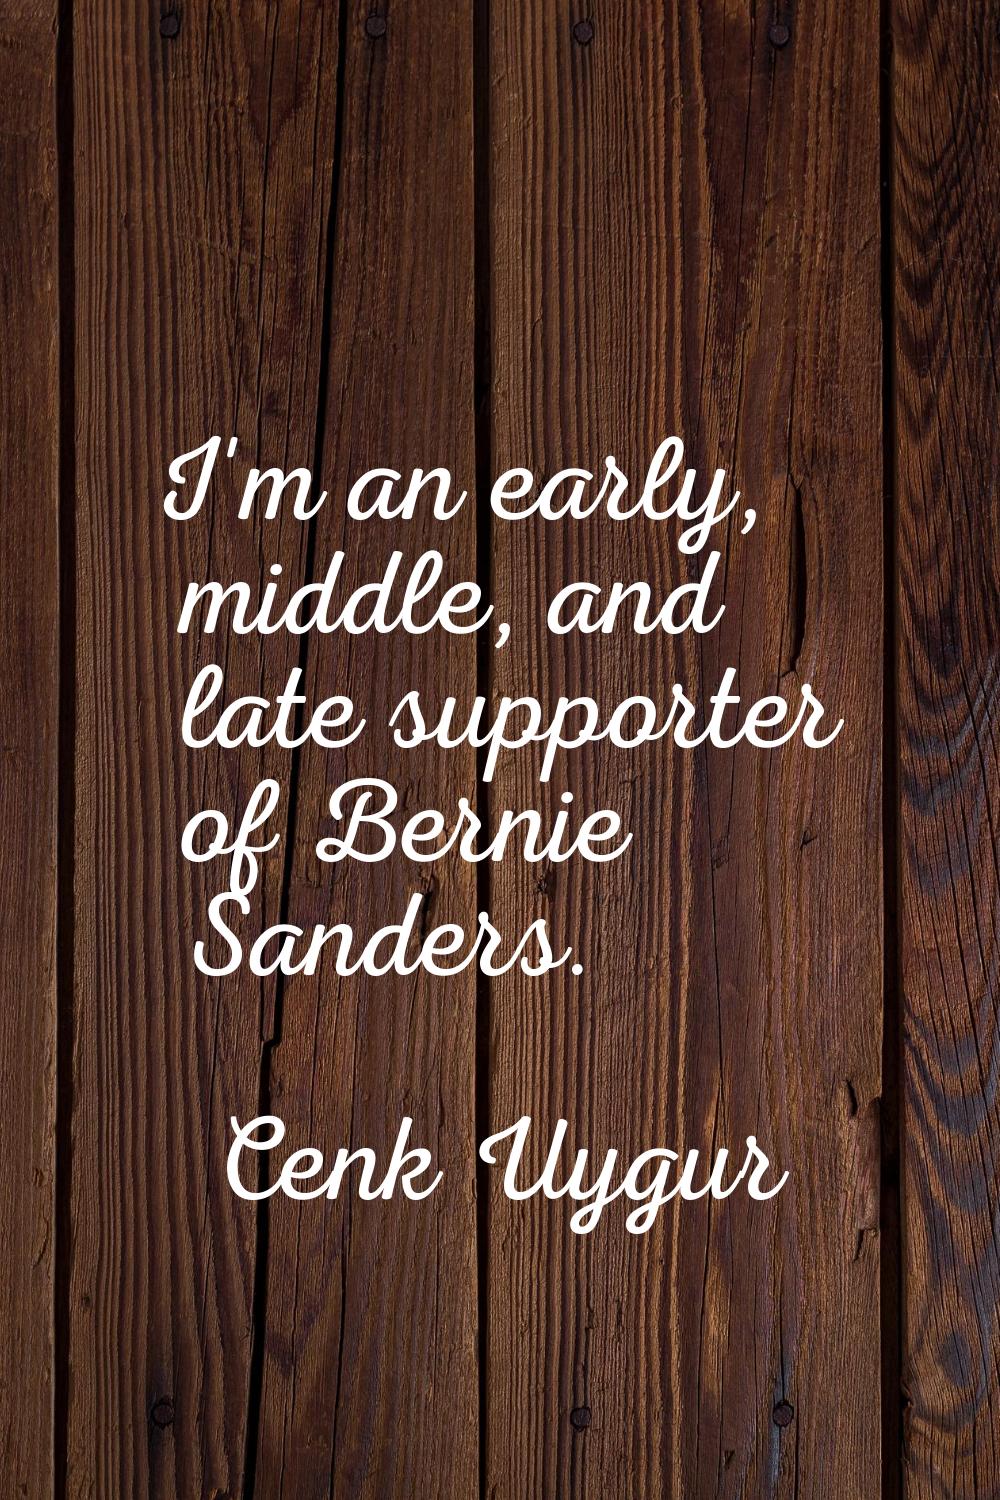 I'm an early, middle, and late supporter of Bernie Sanders.